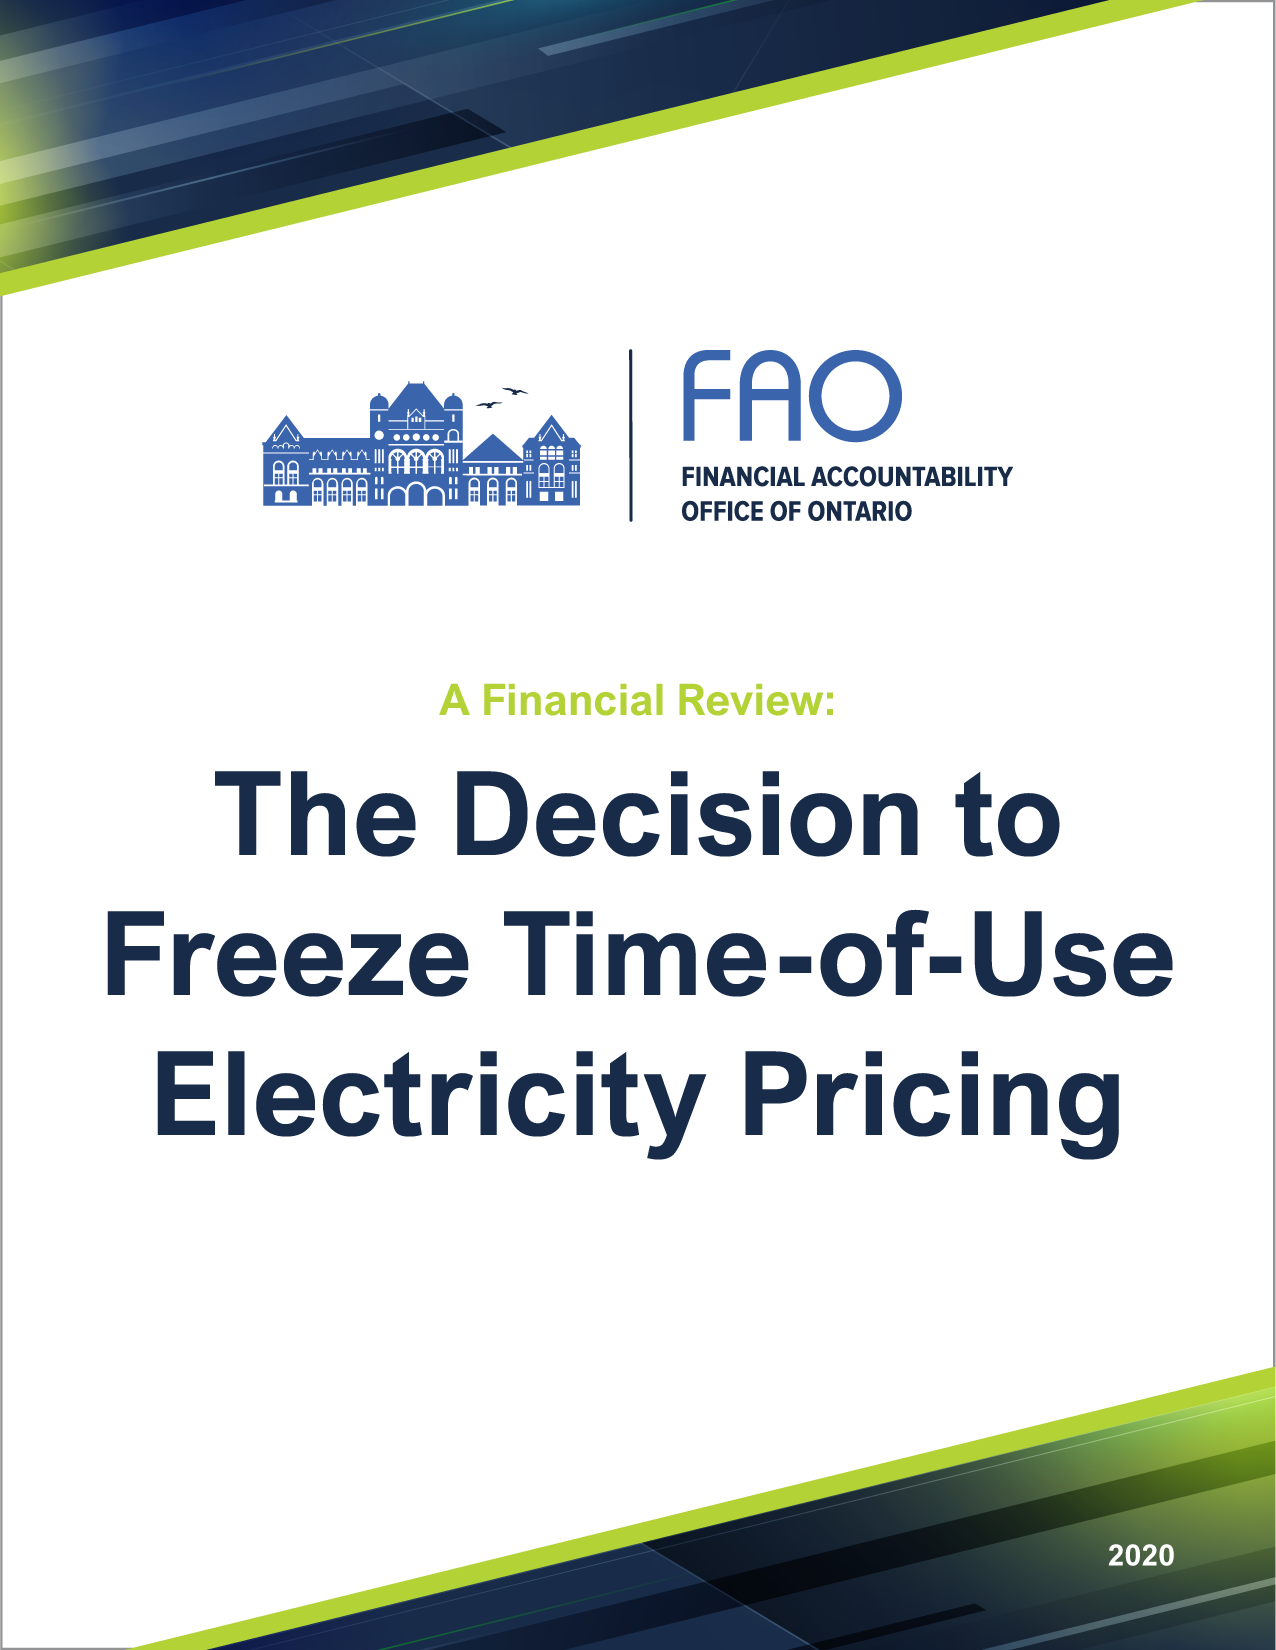 A Financial Review: The Decision to Freeze Time-Of-Use Electricity Pricing